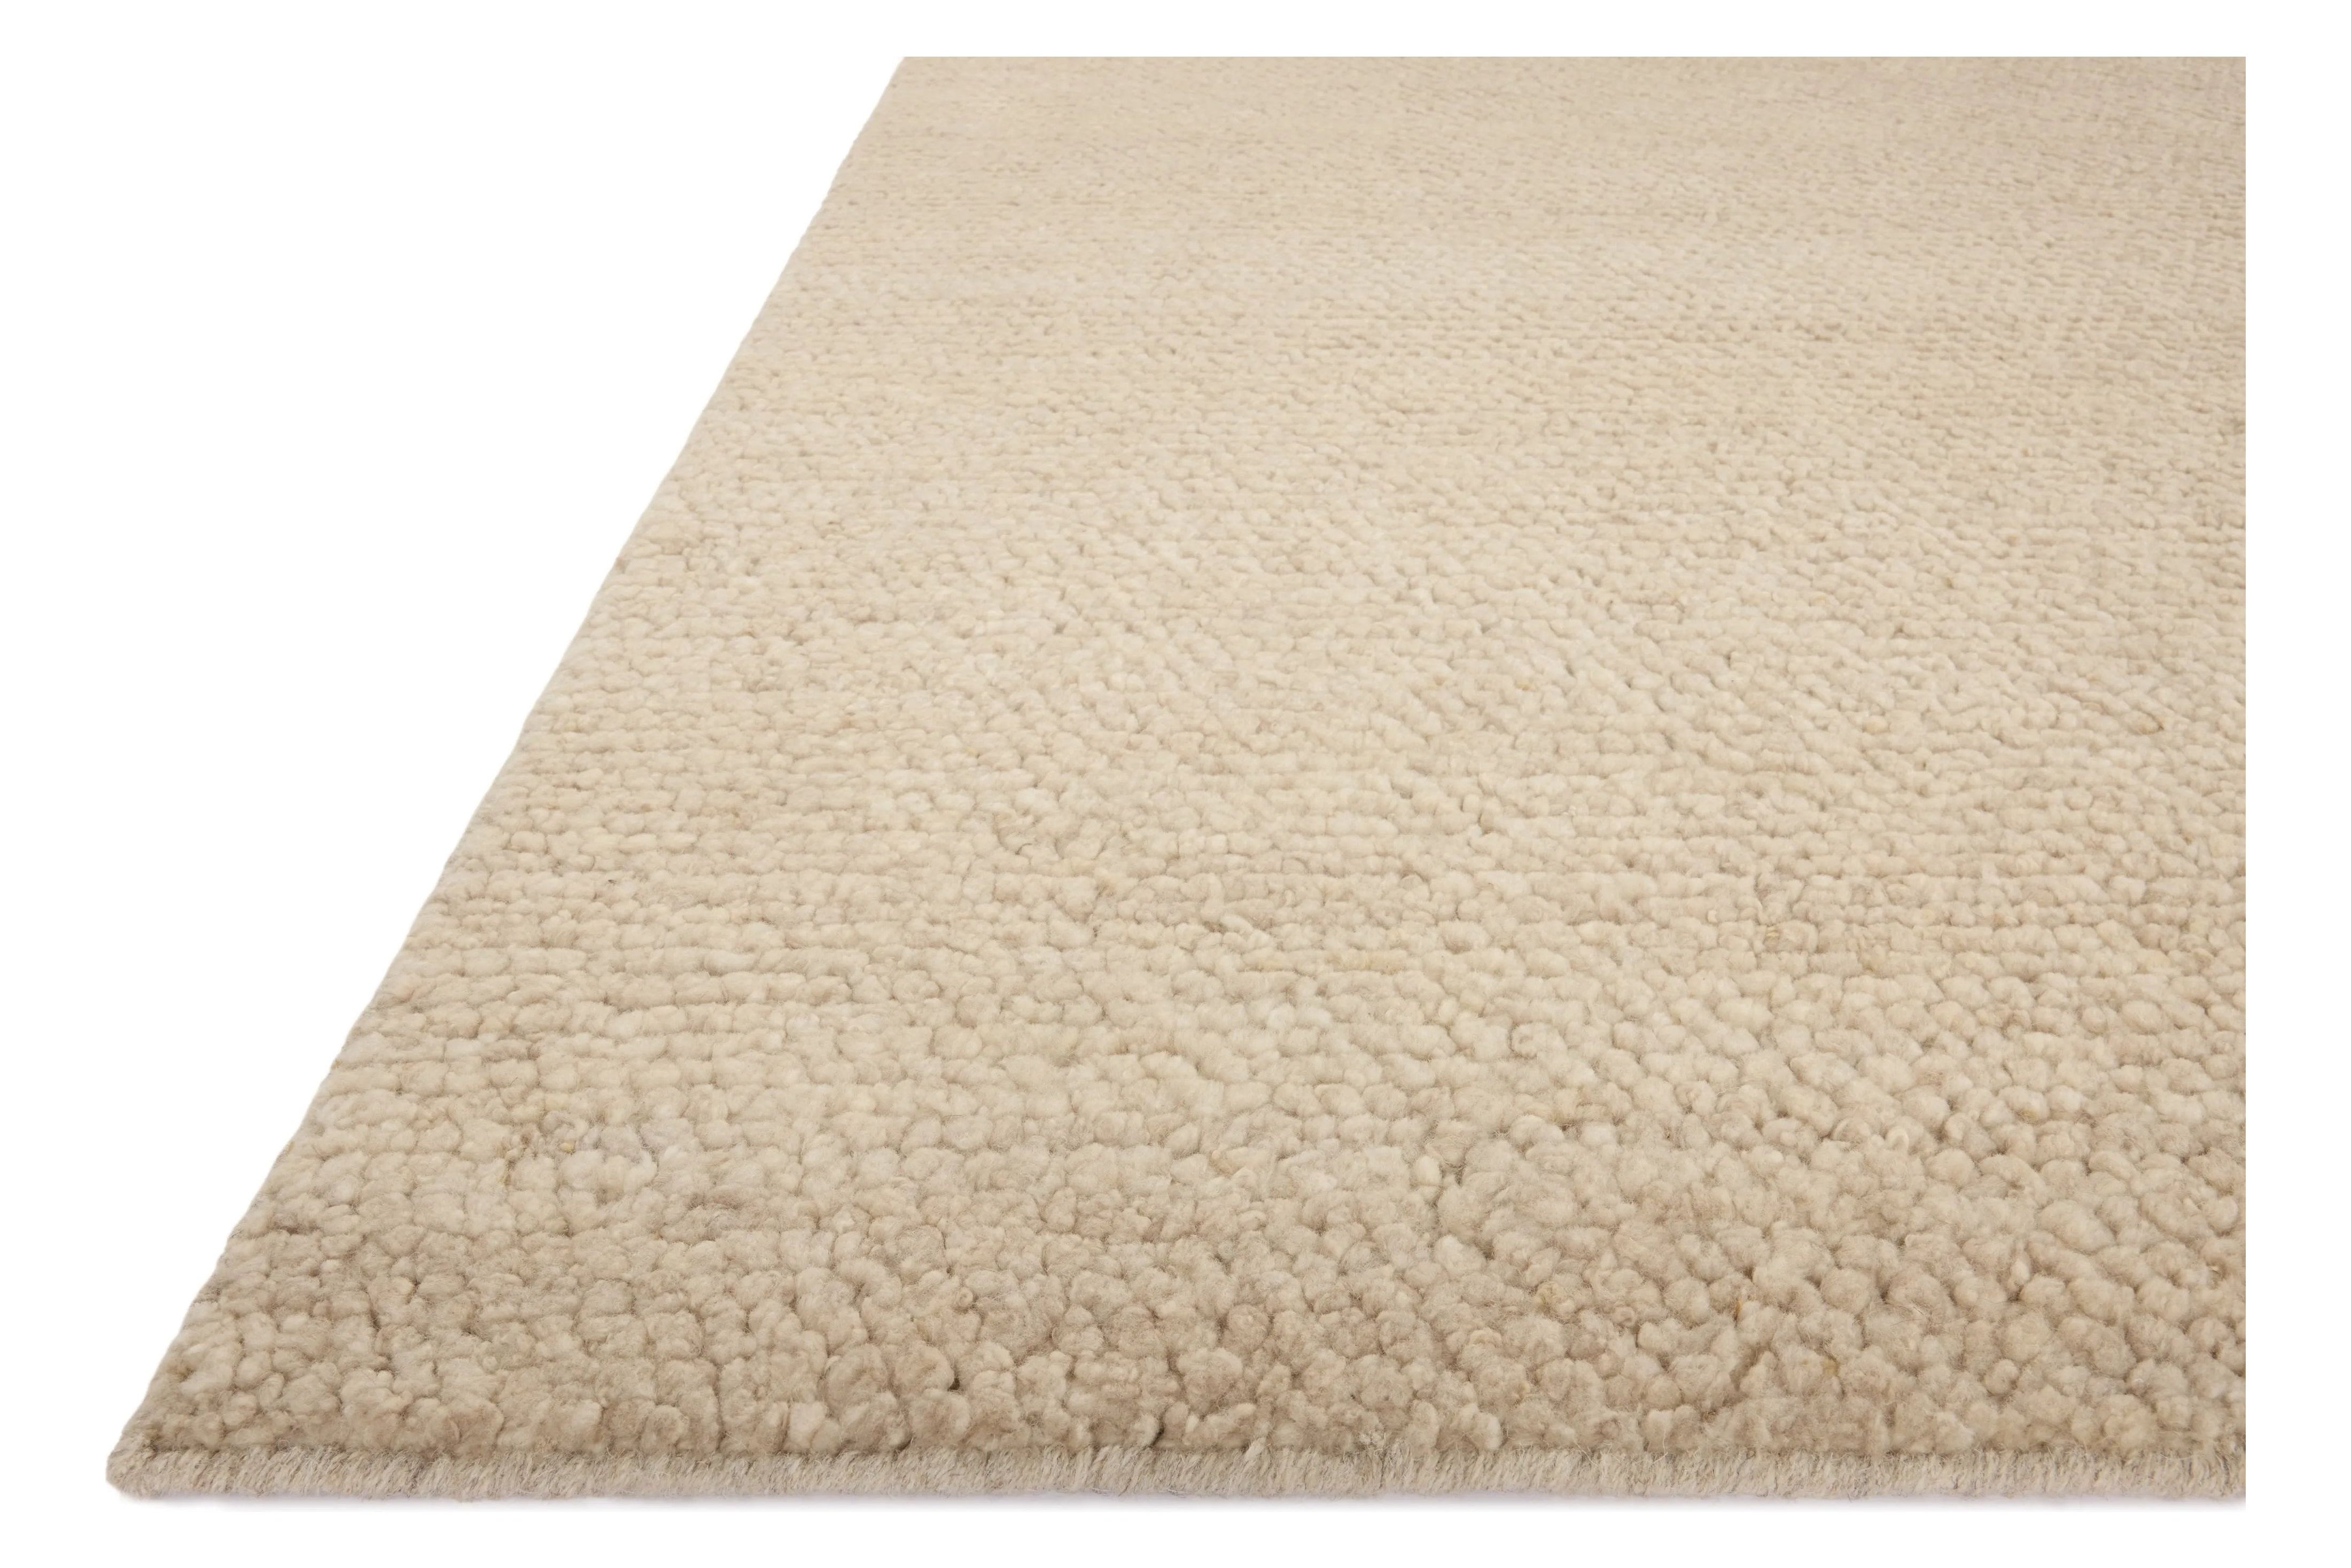 With versatile earth tones and a chunky, hand-knotted texture resembling tiny pebbles, the Frida Bone Rug by Brigette Romanek x Loloi can ground any room with a sense of elevated ease. Each area rug features a subtle nuance in color variation due to the handmade nature of its construction and has a pleasantly nubby softness underfoot. Amethyst Home provides interior design, new home construction design consulting, vintage area rugs, and lighting in the Calabasas metro area.